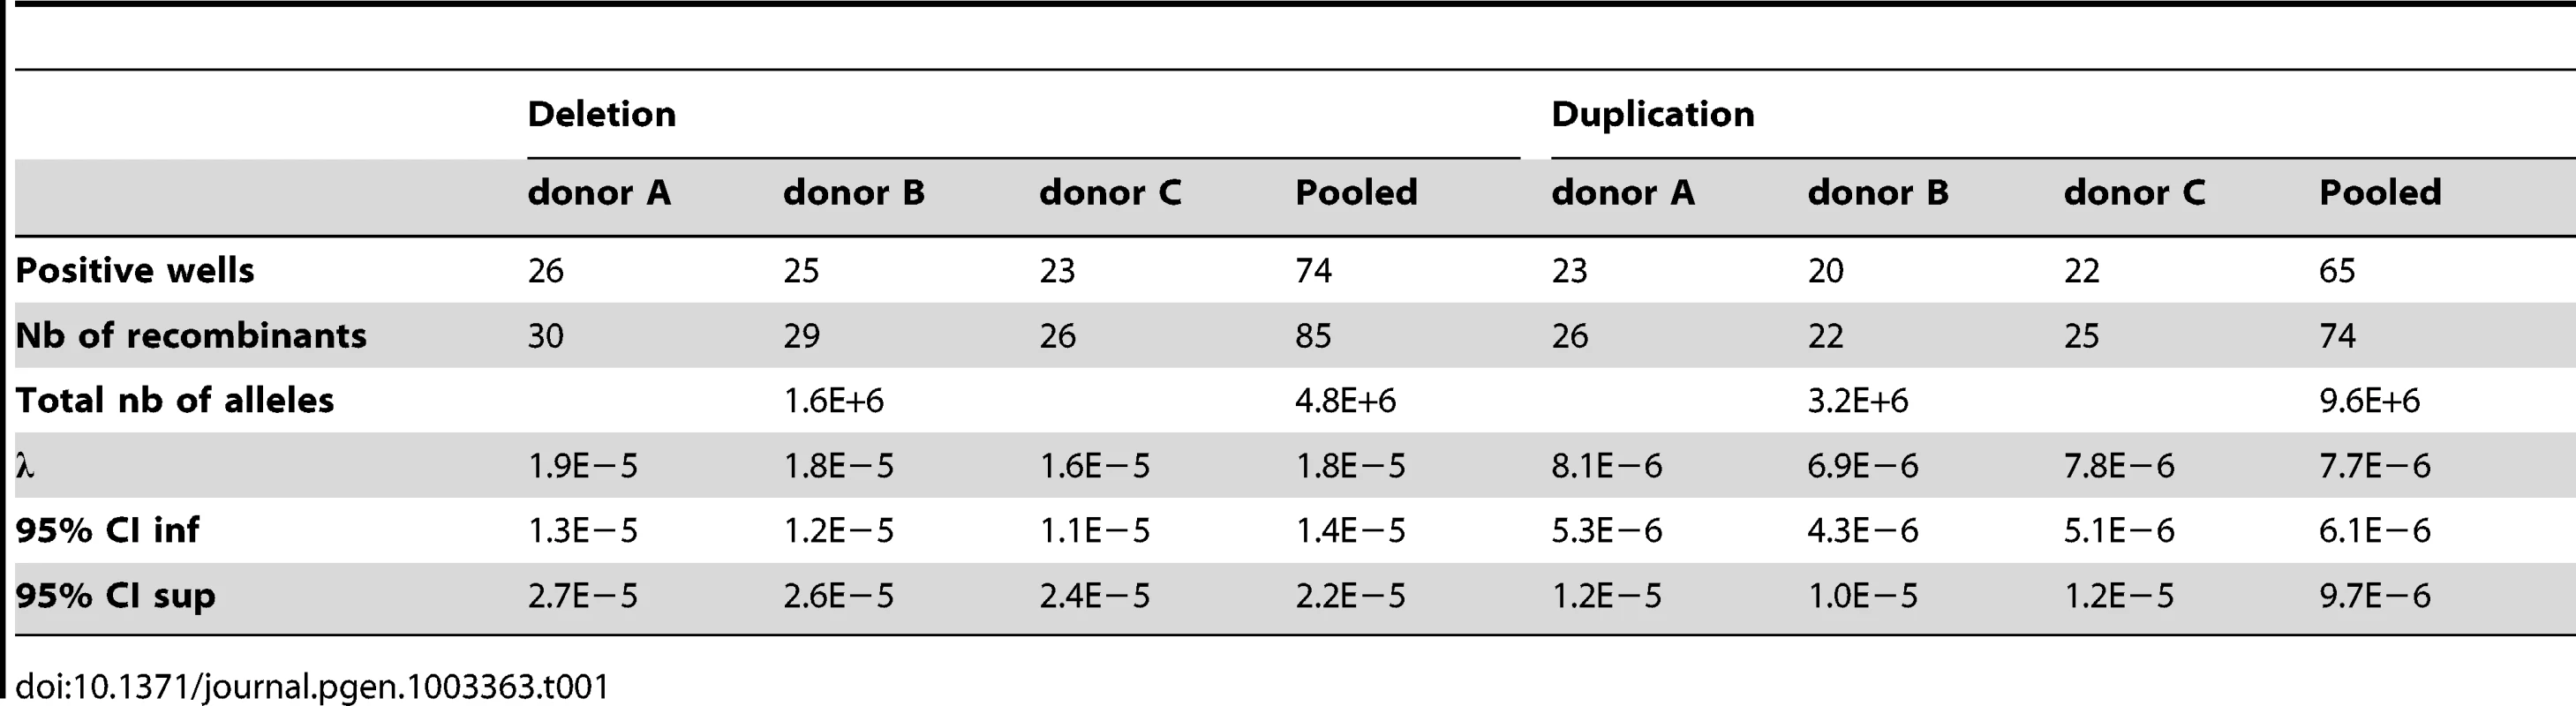 Frequency of deleted and duplicated alleles in sperm from three control donors.